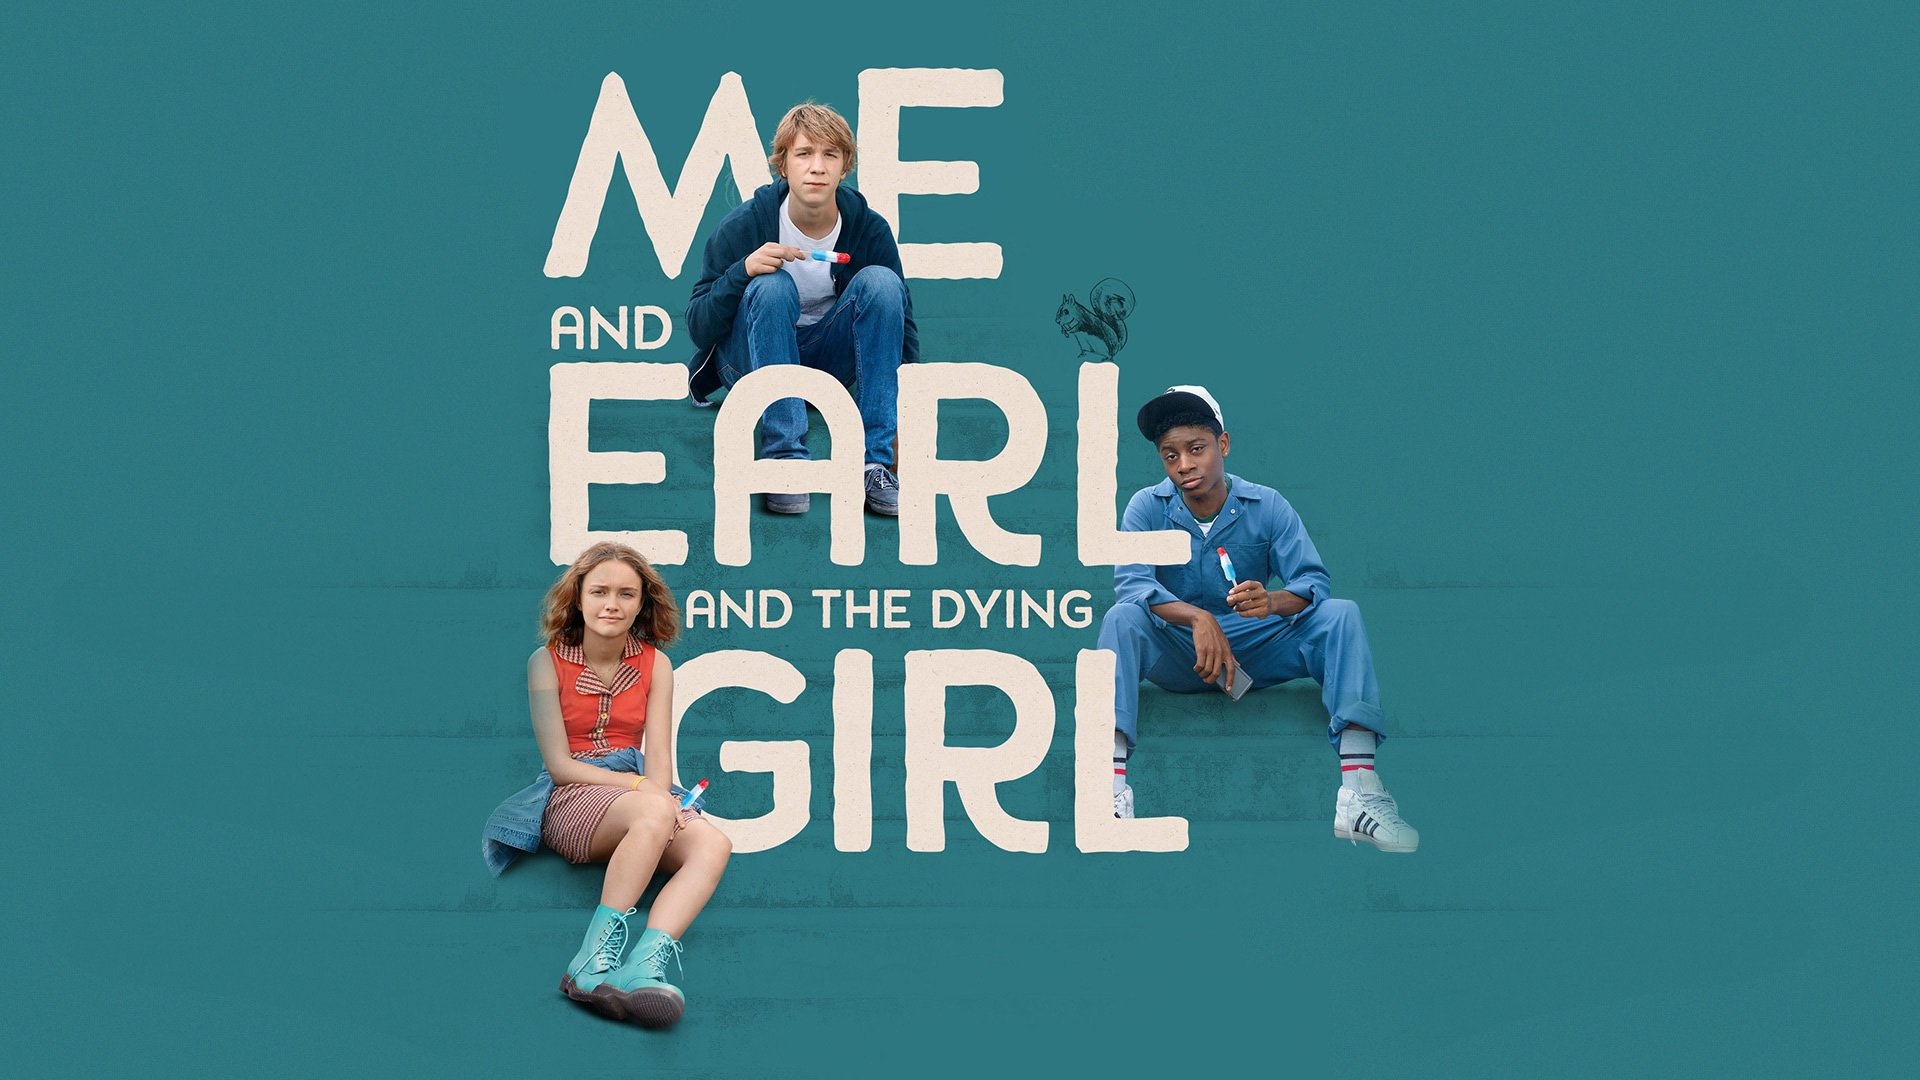 Me and Earl and the Dying Girl, HD wallpaper, Background image, 1920x1080 Full HD Desktop